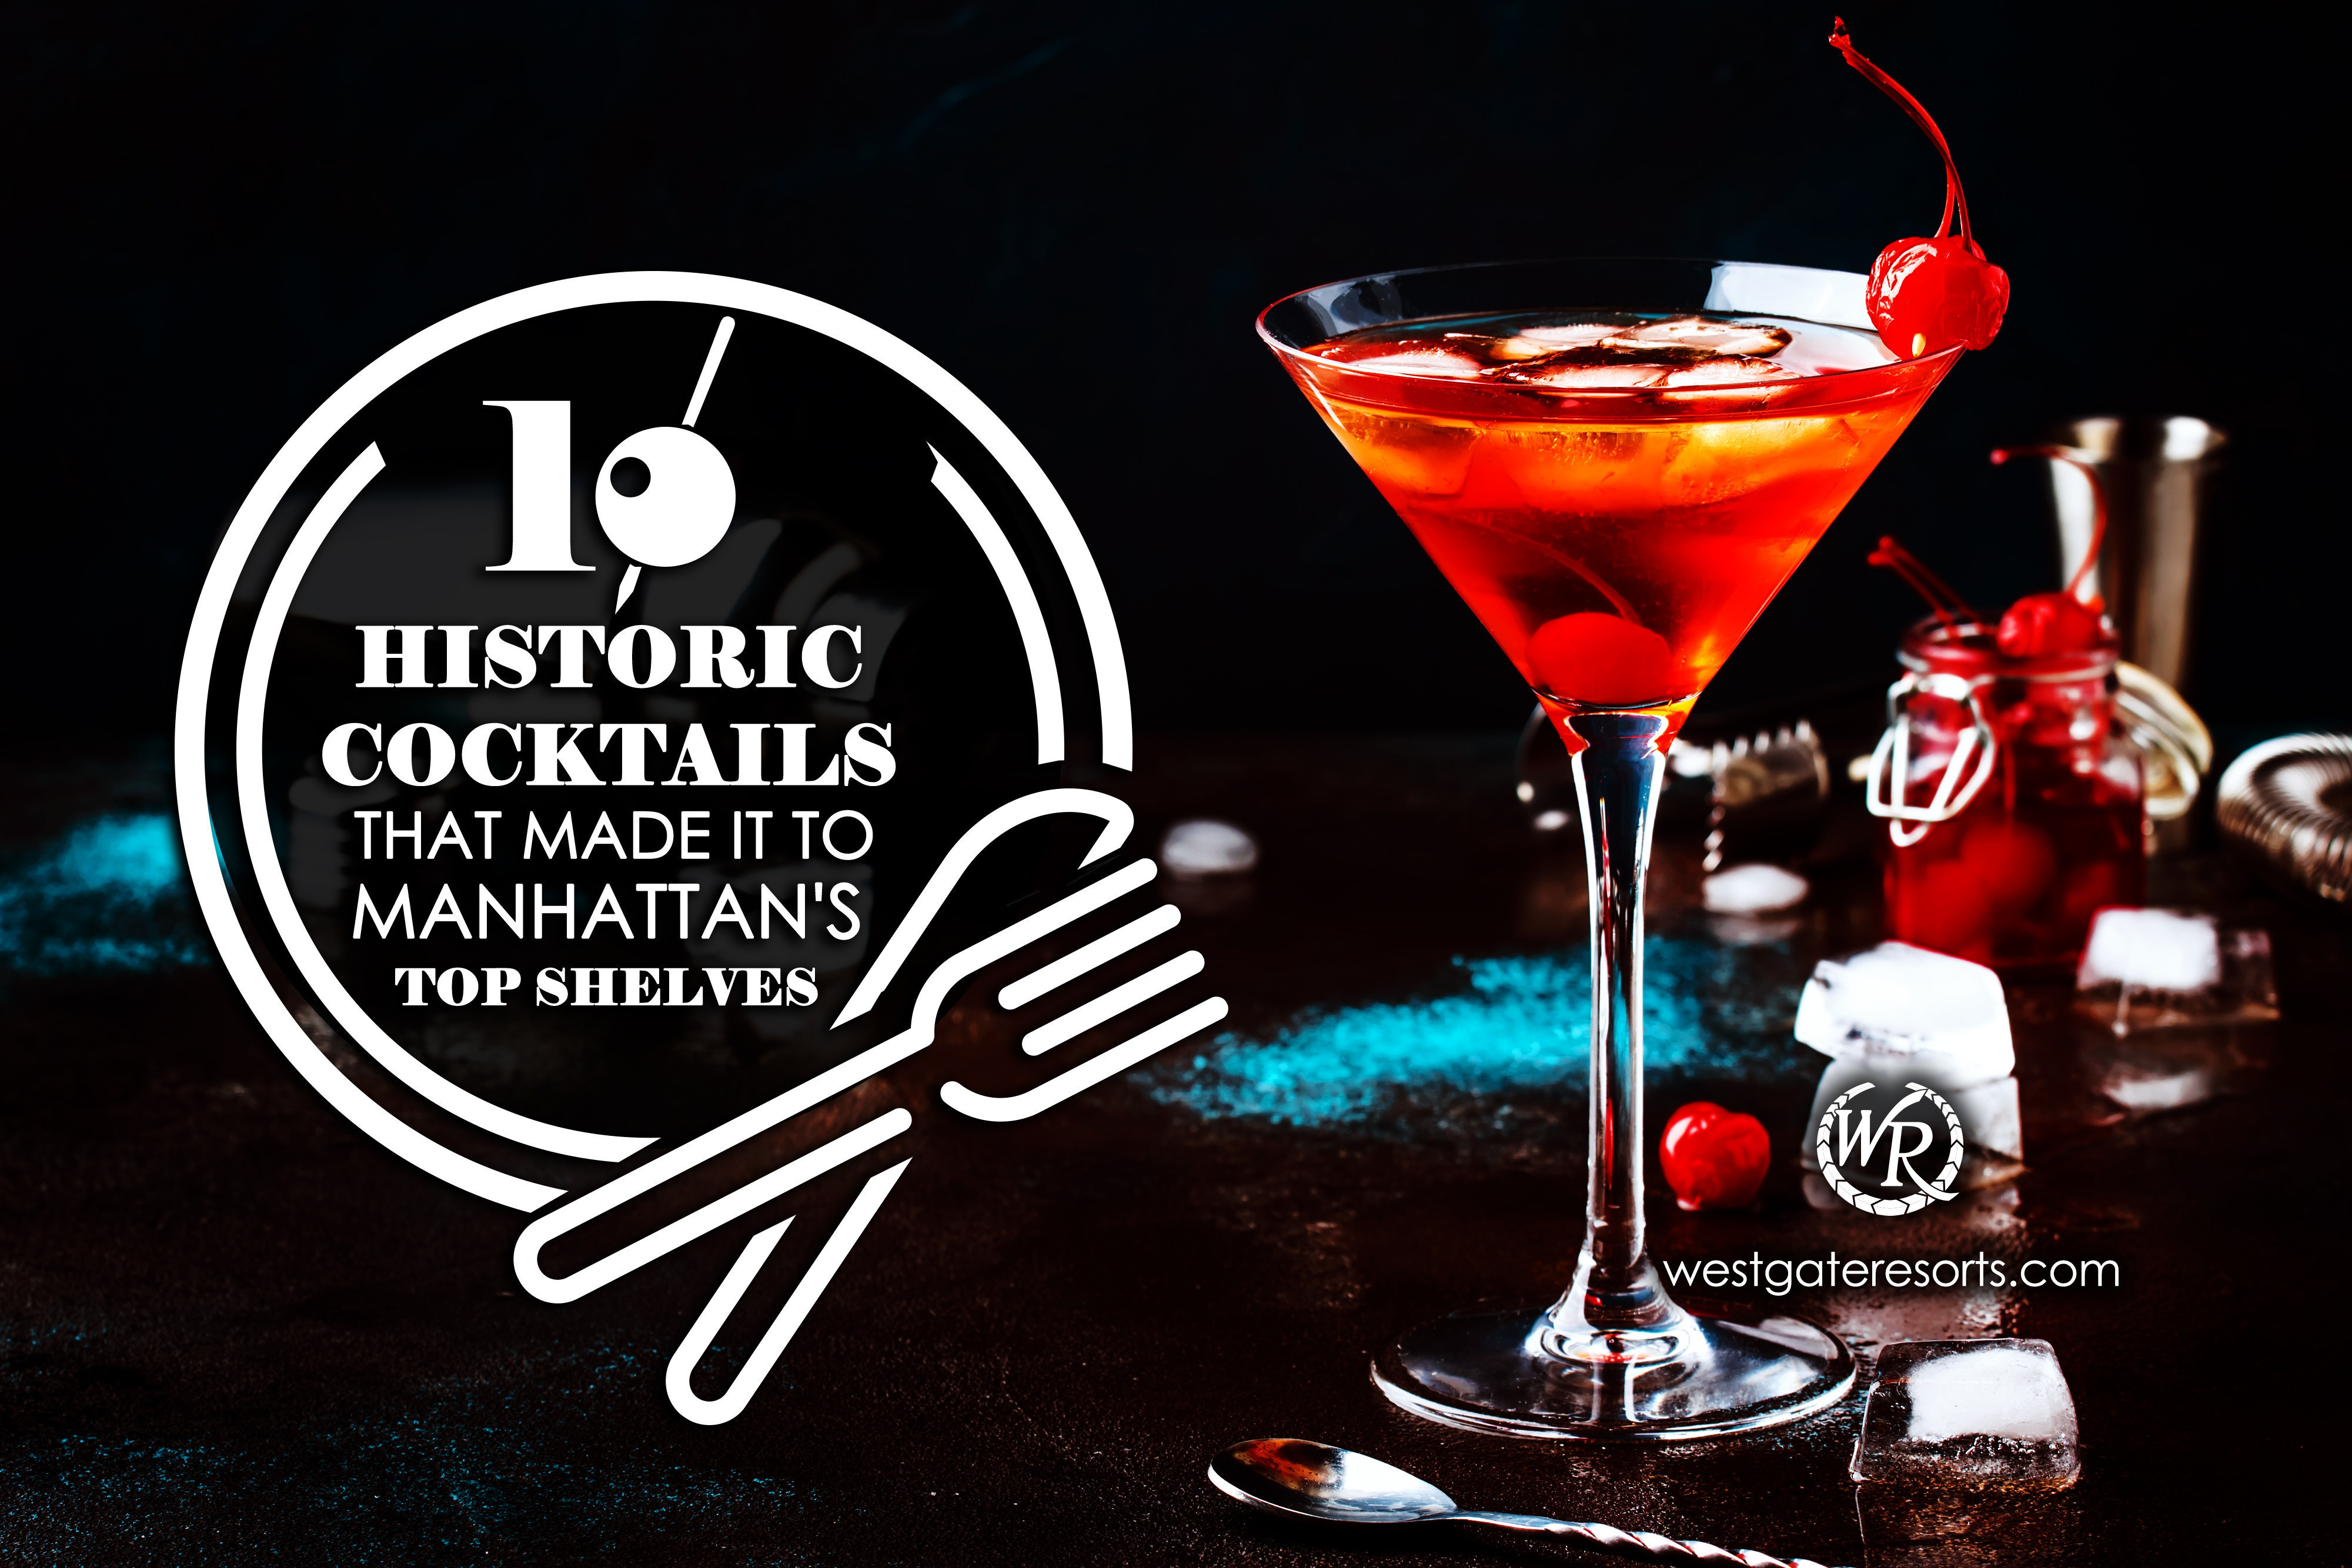 10 Historic Cocktails That Made It To Manhattan's Top Shelves